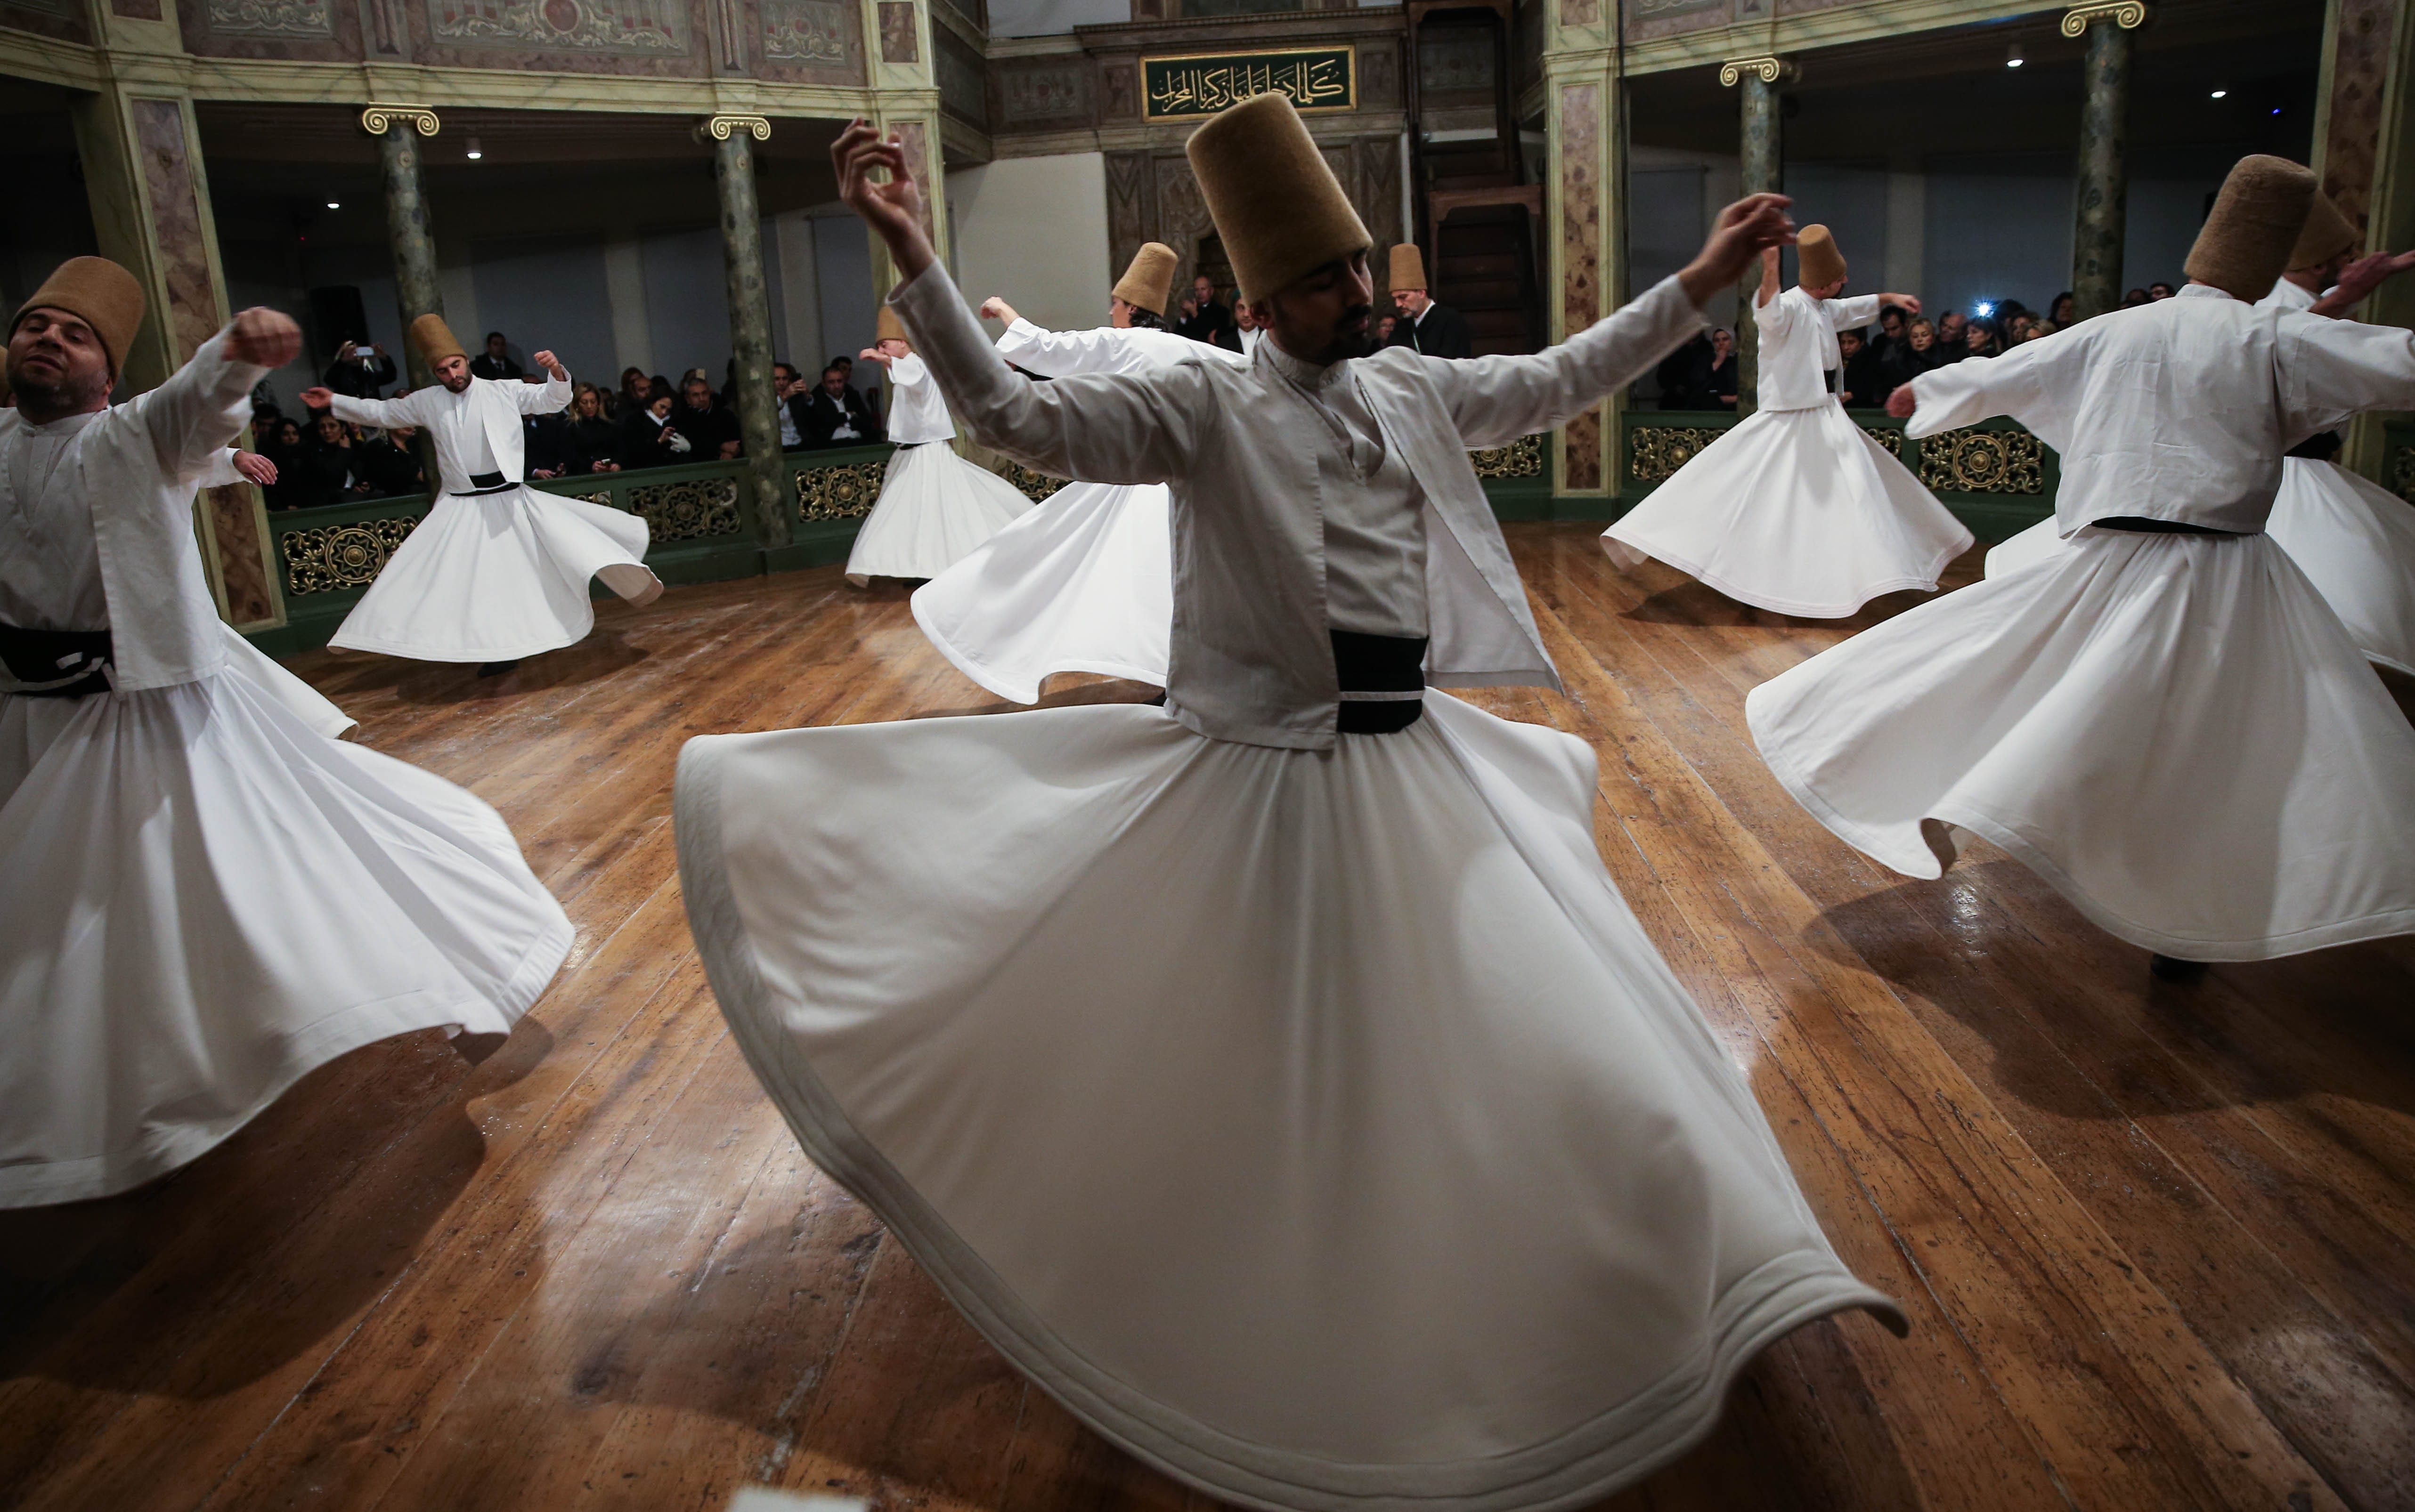 Magnificent images of Whirling dervishes celebrating the life and death ...